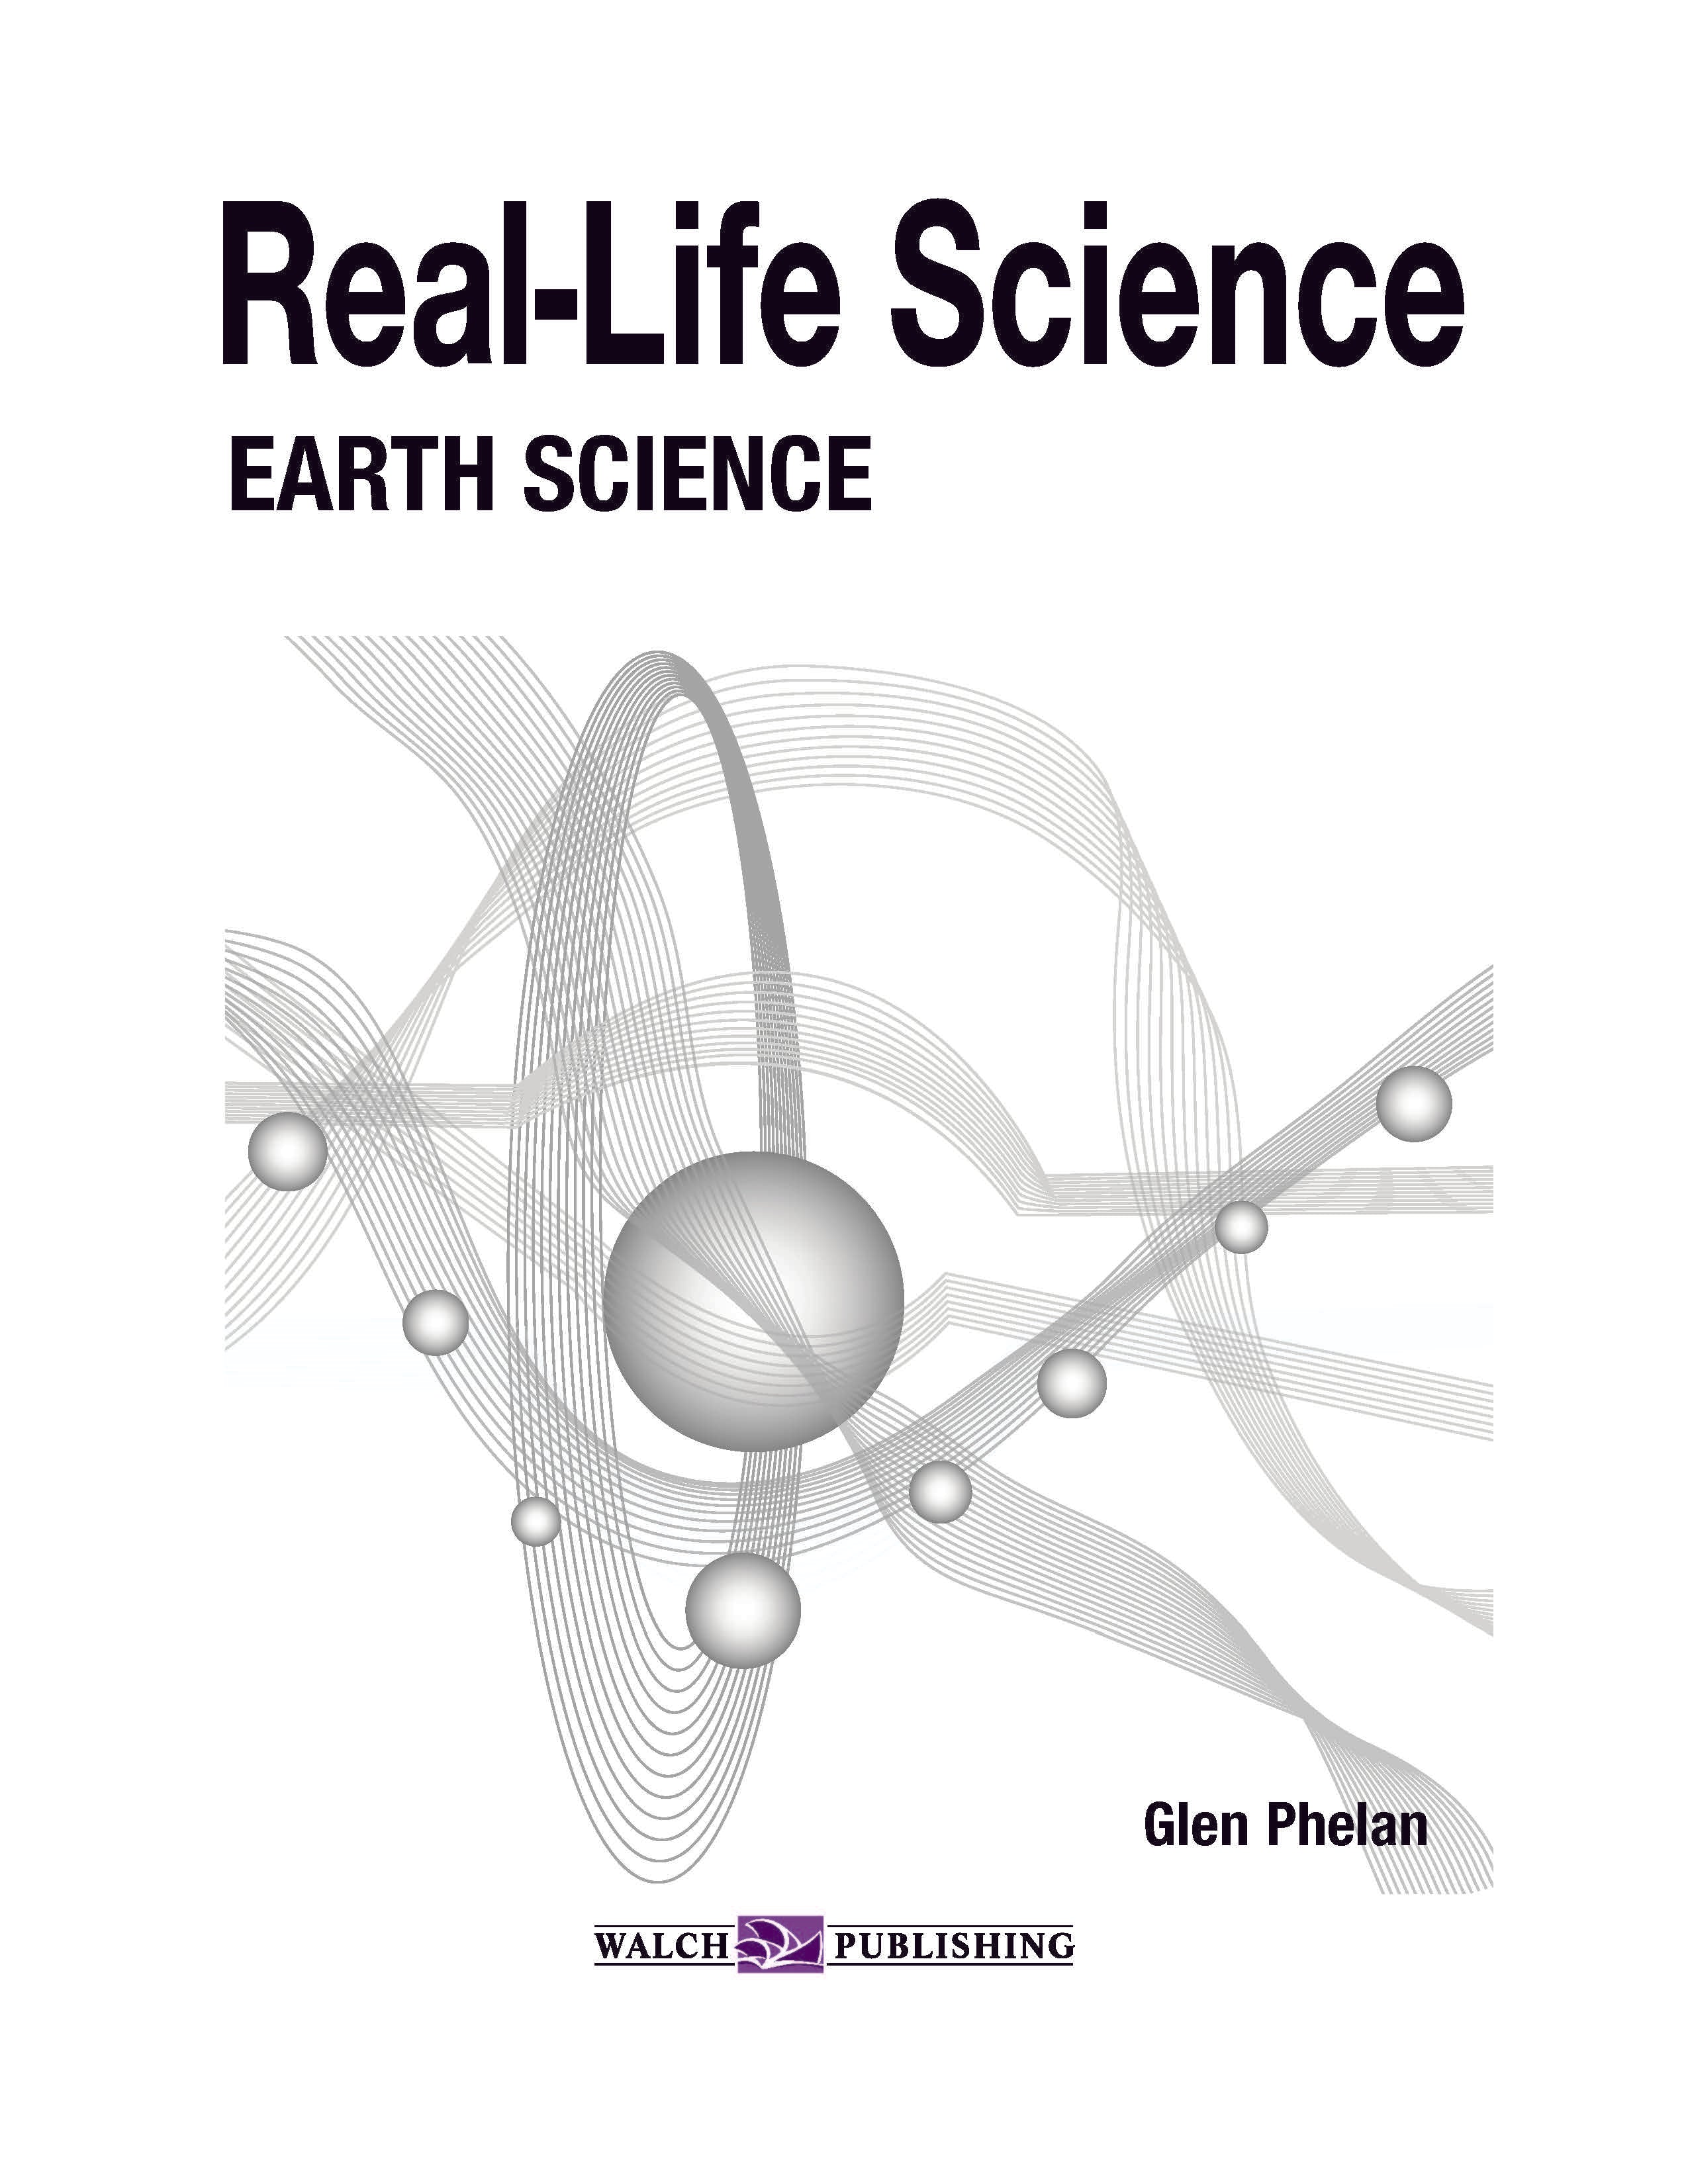 Real　Textbooks　Education　Book　Science　Earth　Life　Science　Resources　Classroom　Science　Education　Resources　Bright　Australia　Teaching　Science　Science　Science　Real　Resources　Science　Books　Life　–　Earth　Book